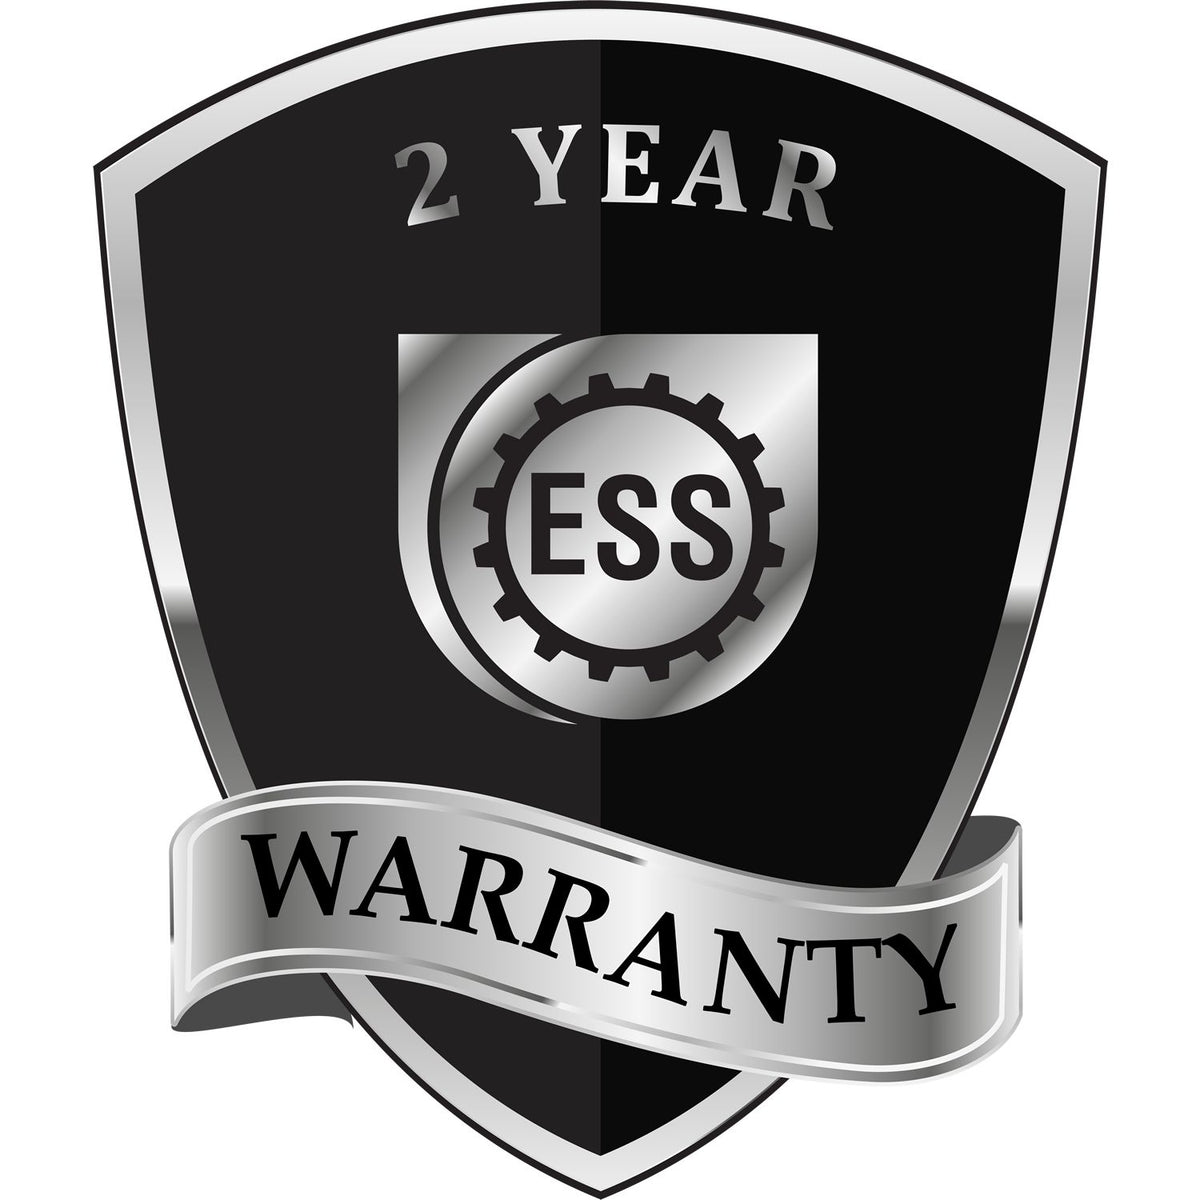 A badge or emblem showing a warranty icon for the Soft Georgia Professional Engineer Seal